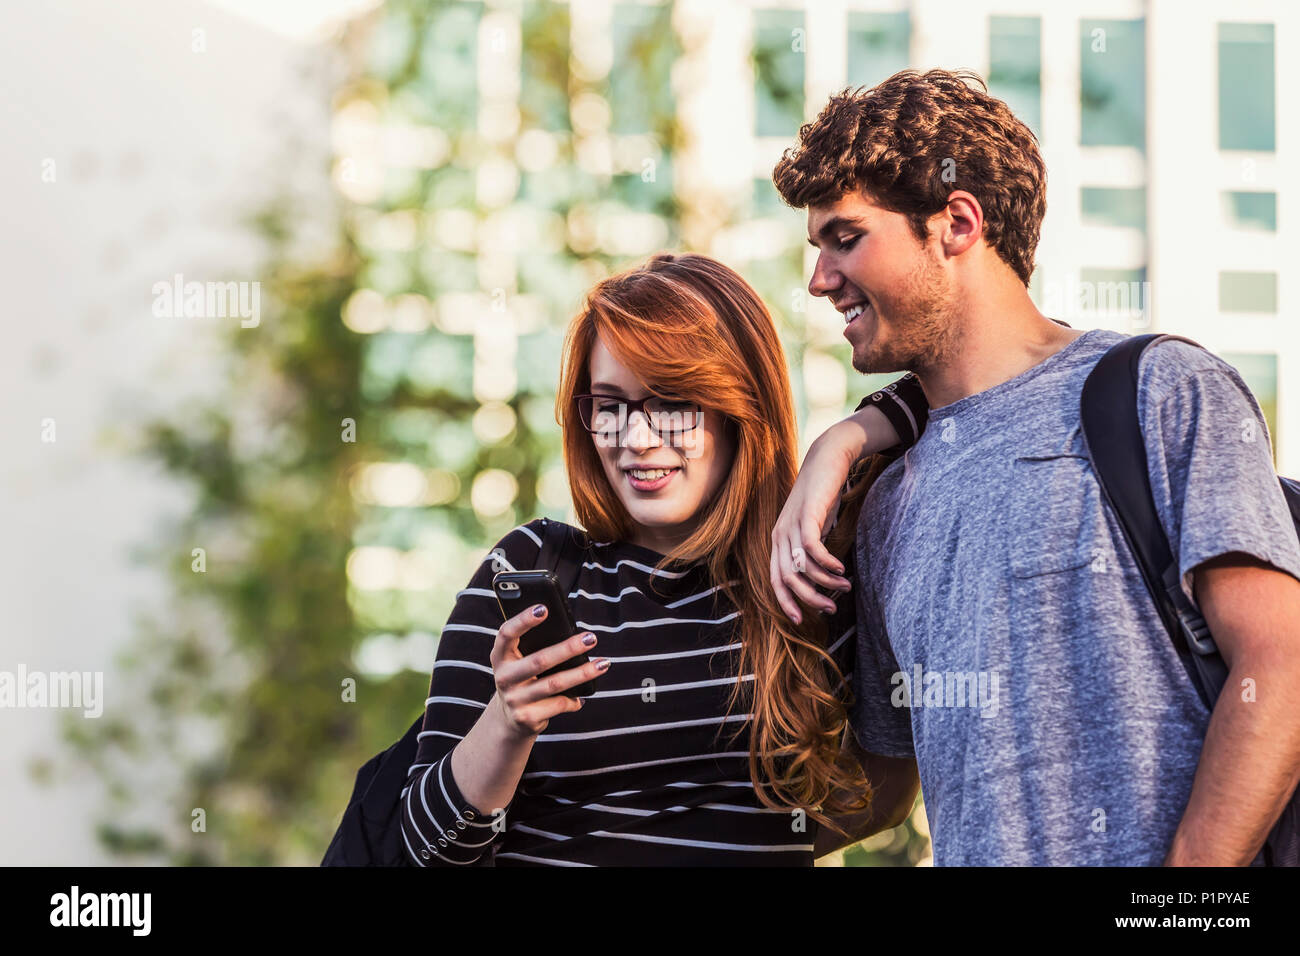 A young couple standing together and checking social media on a smart phone while walking through a university campus; Edmonton, Alberta, Canada Stock Photo